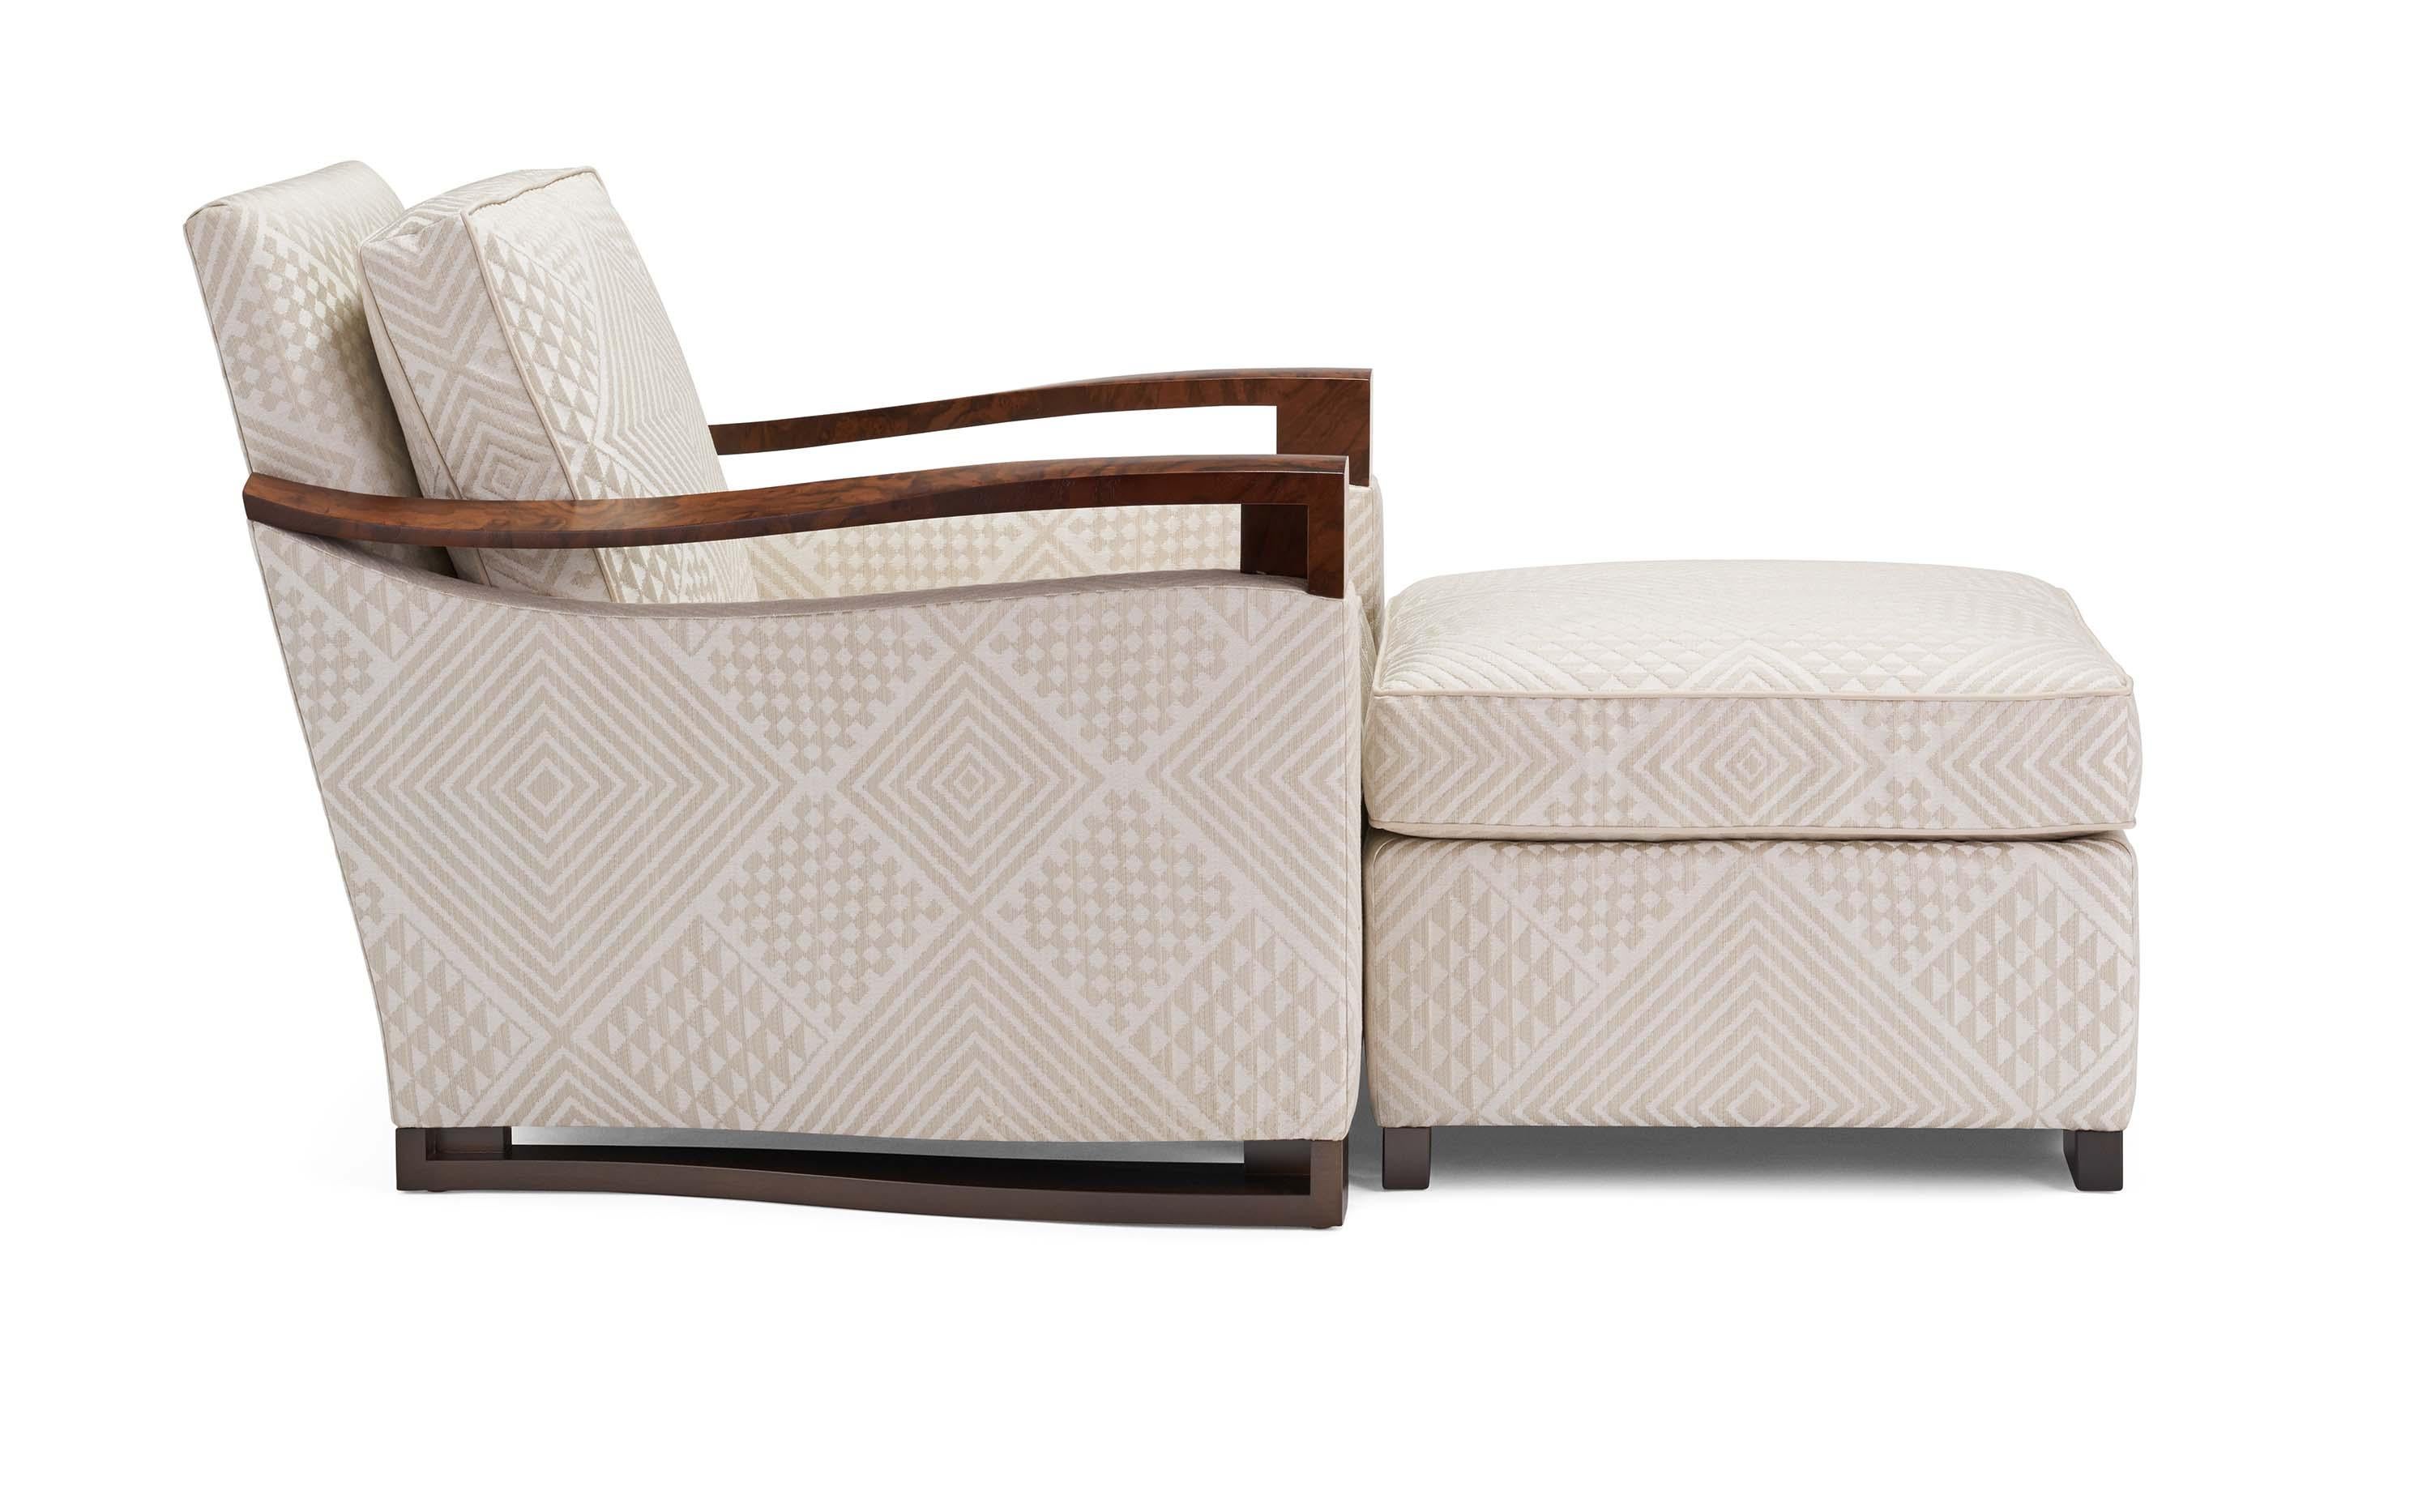 American Donghia Woodbridge Club Chair and Ottoman in Cream Upholstery, Geometric Pattern For Sale